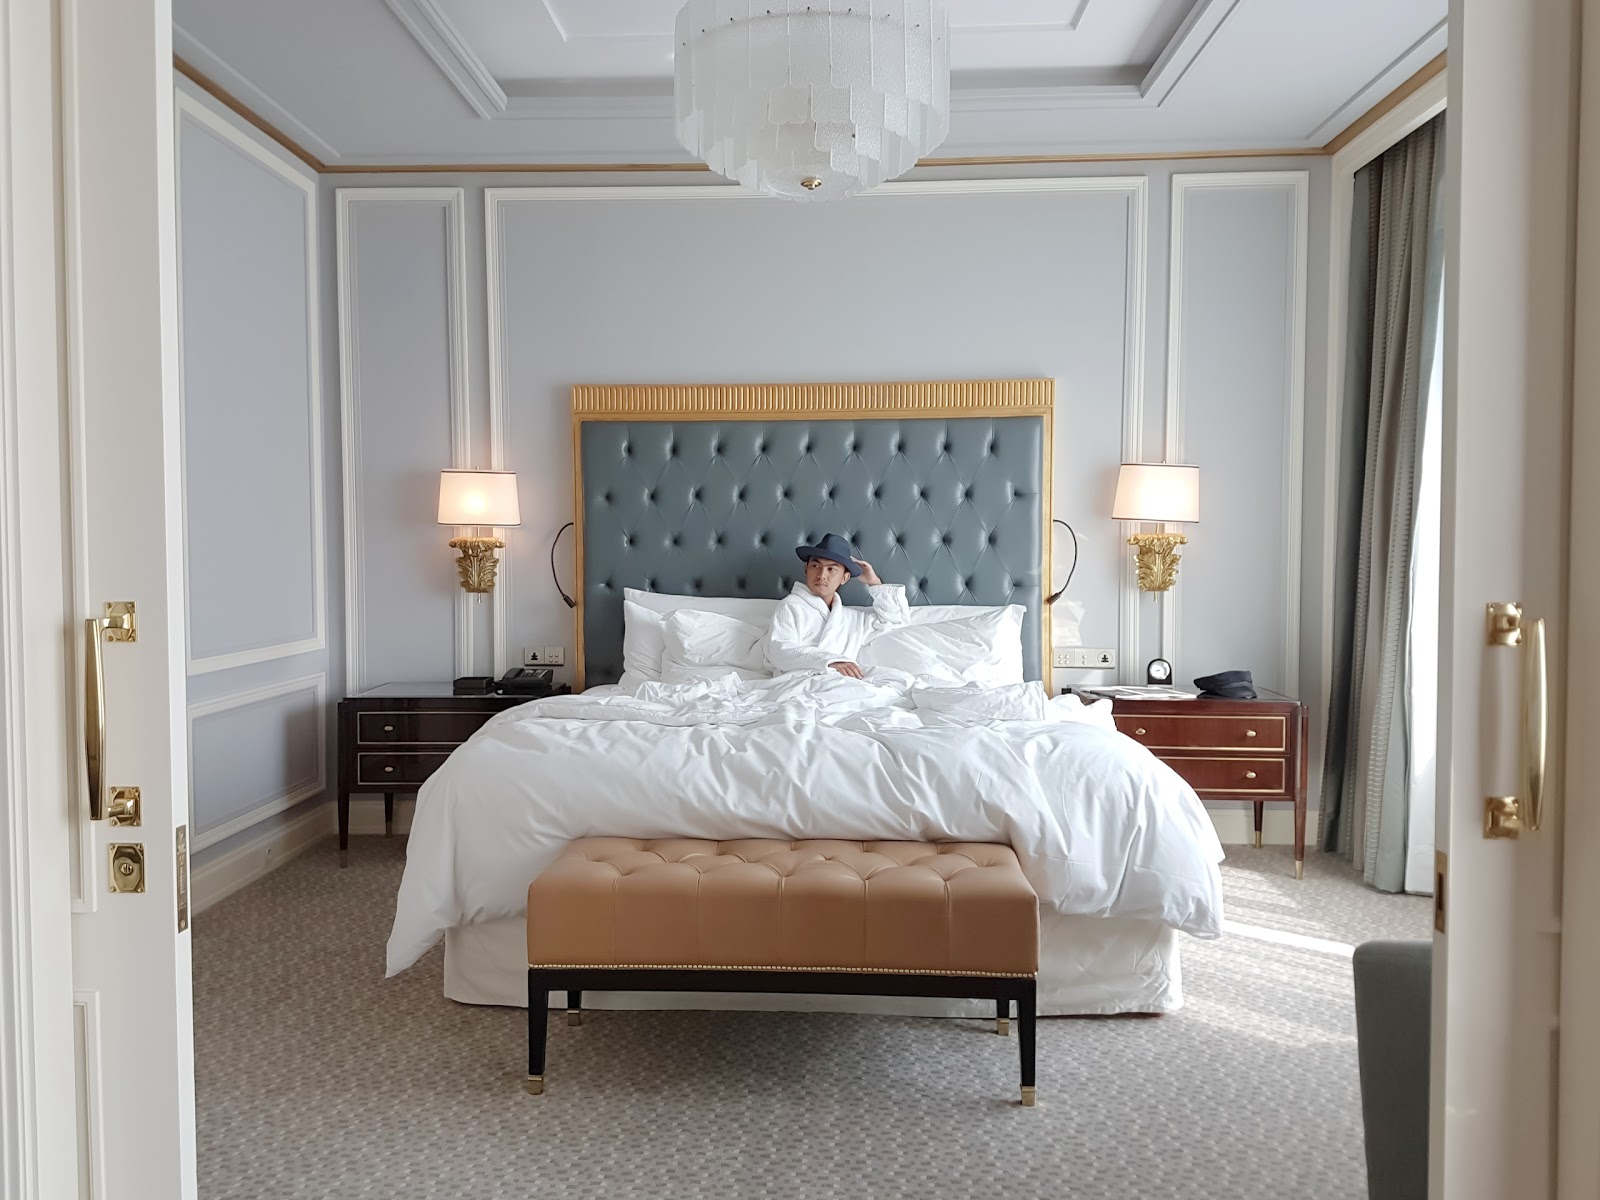 DELUXSHIONIST #STAYCATION AT FOUR SEASONS HOTEL JAKARTA